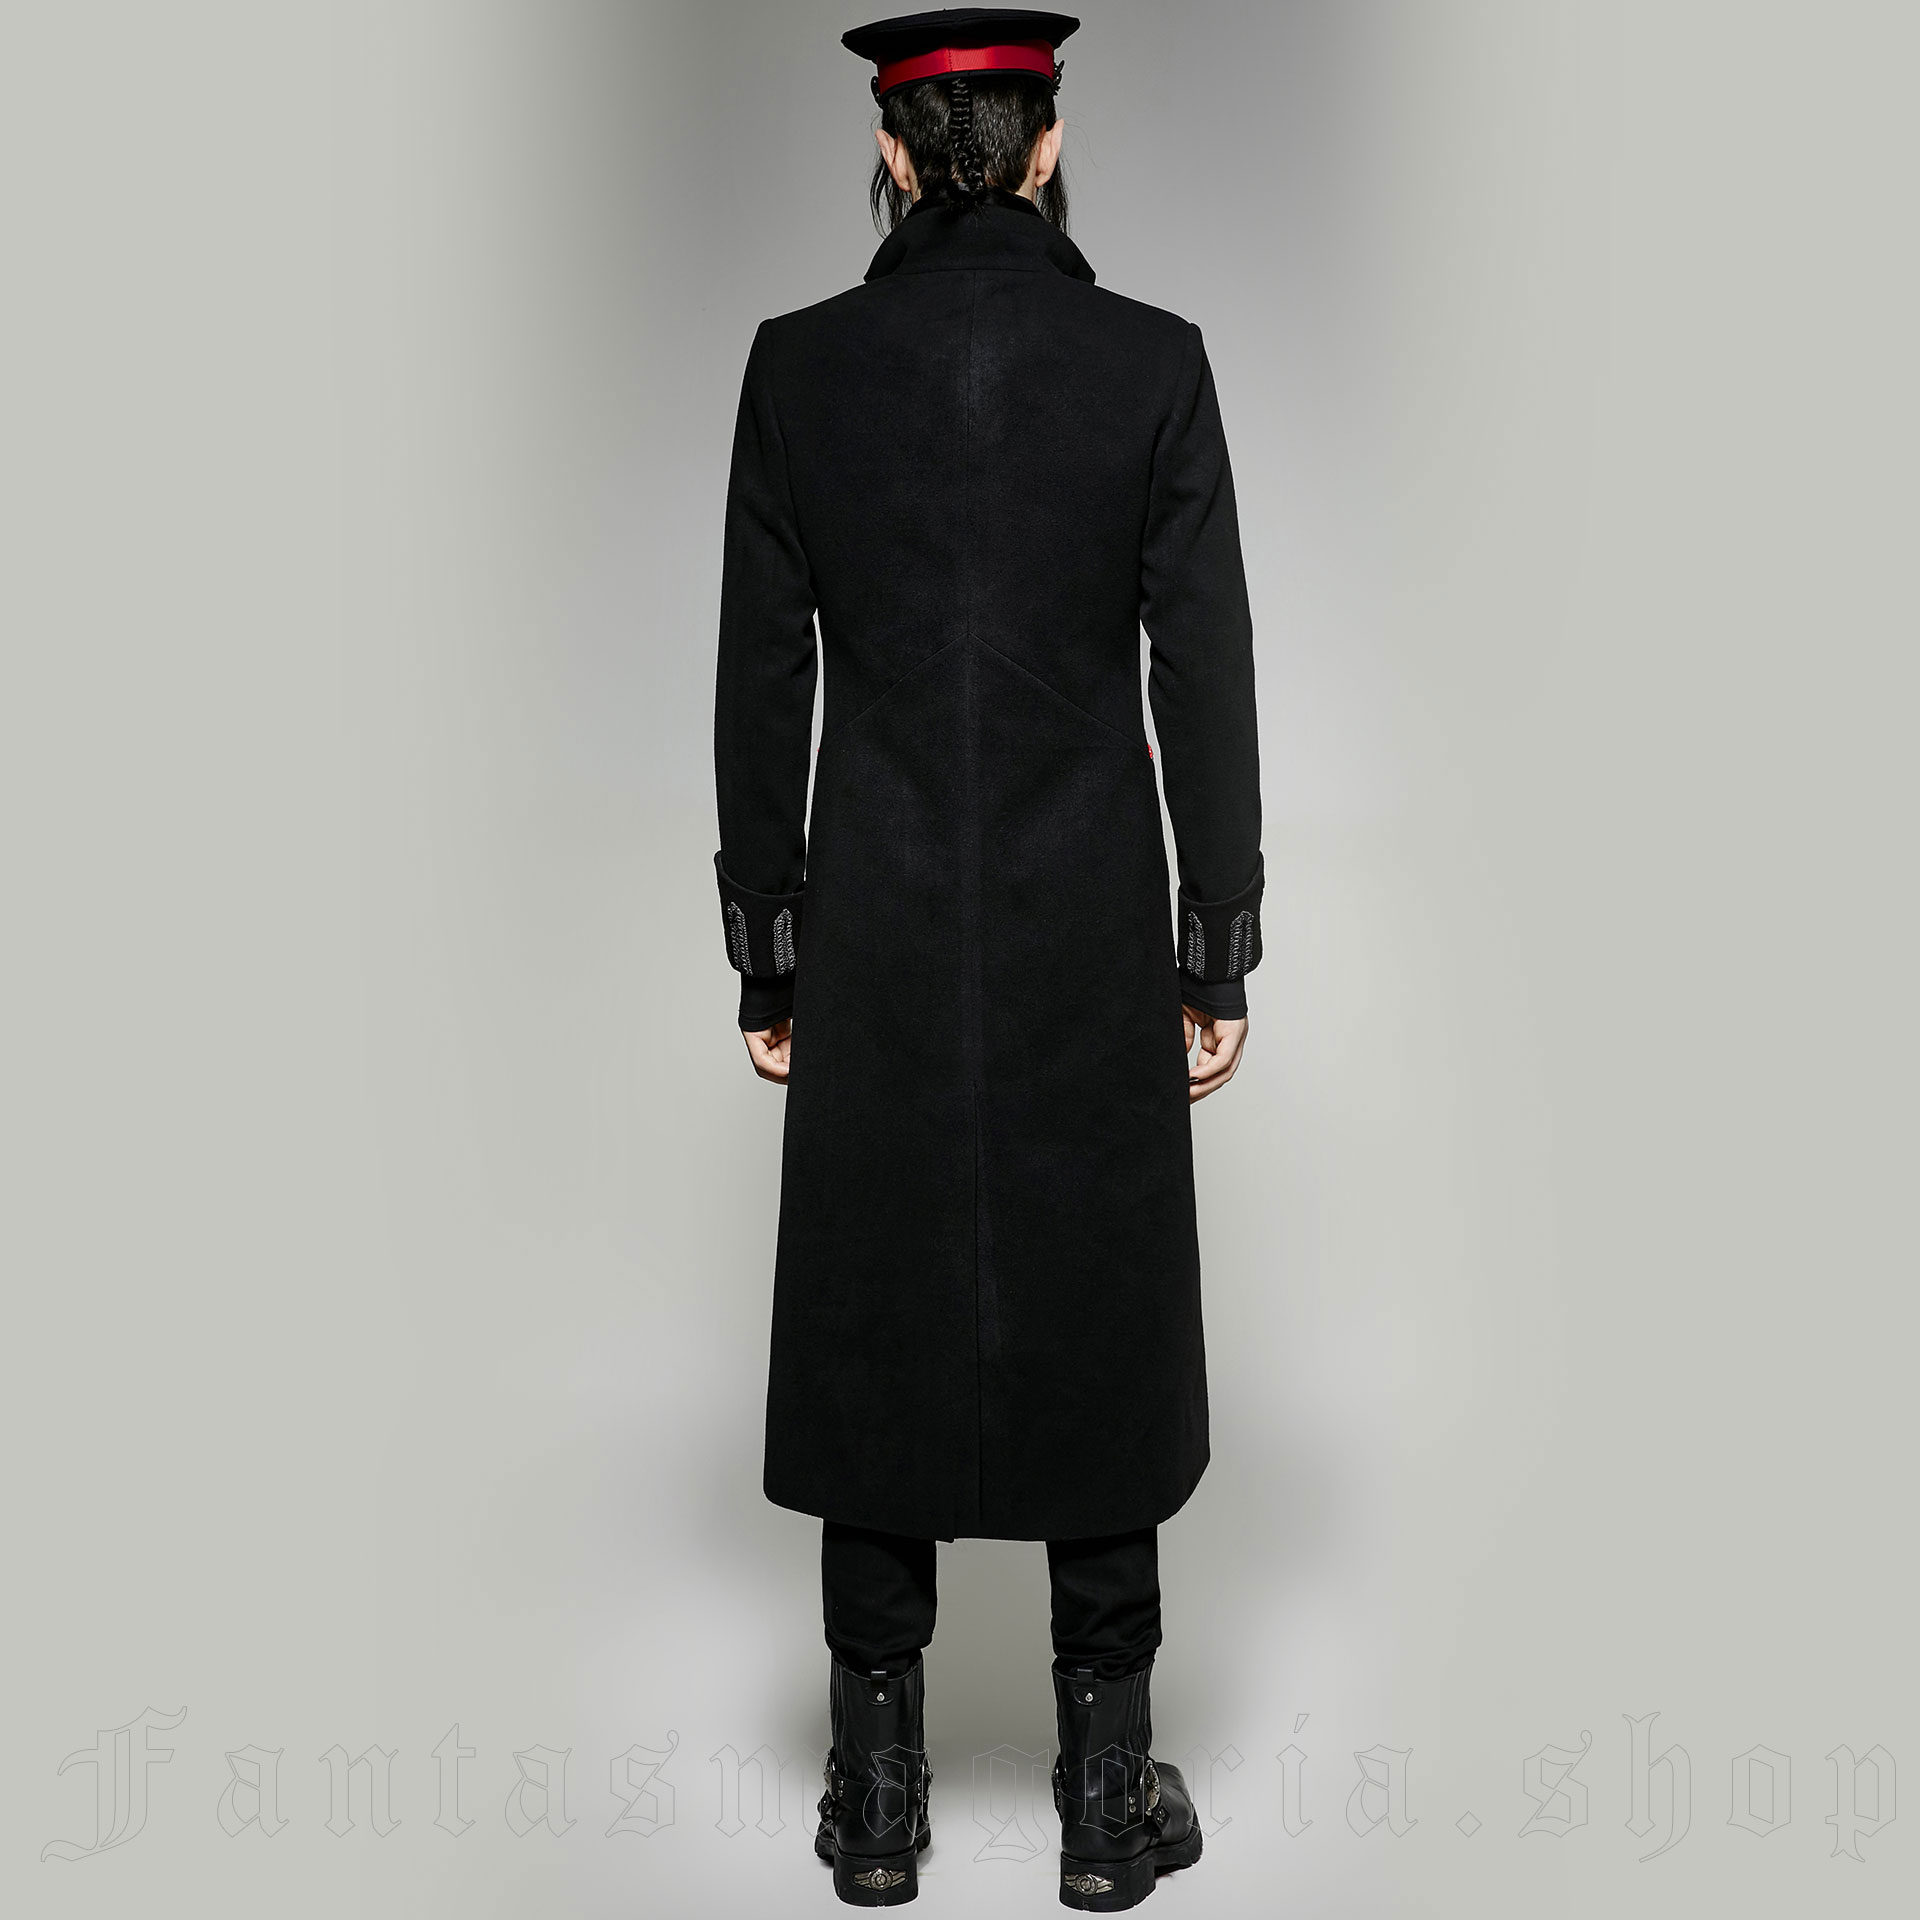 The Undertaker Coat by Punk Rave brand